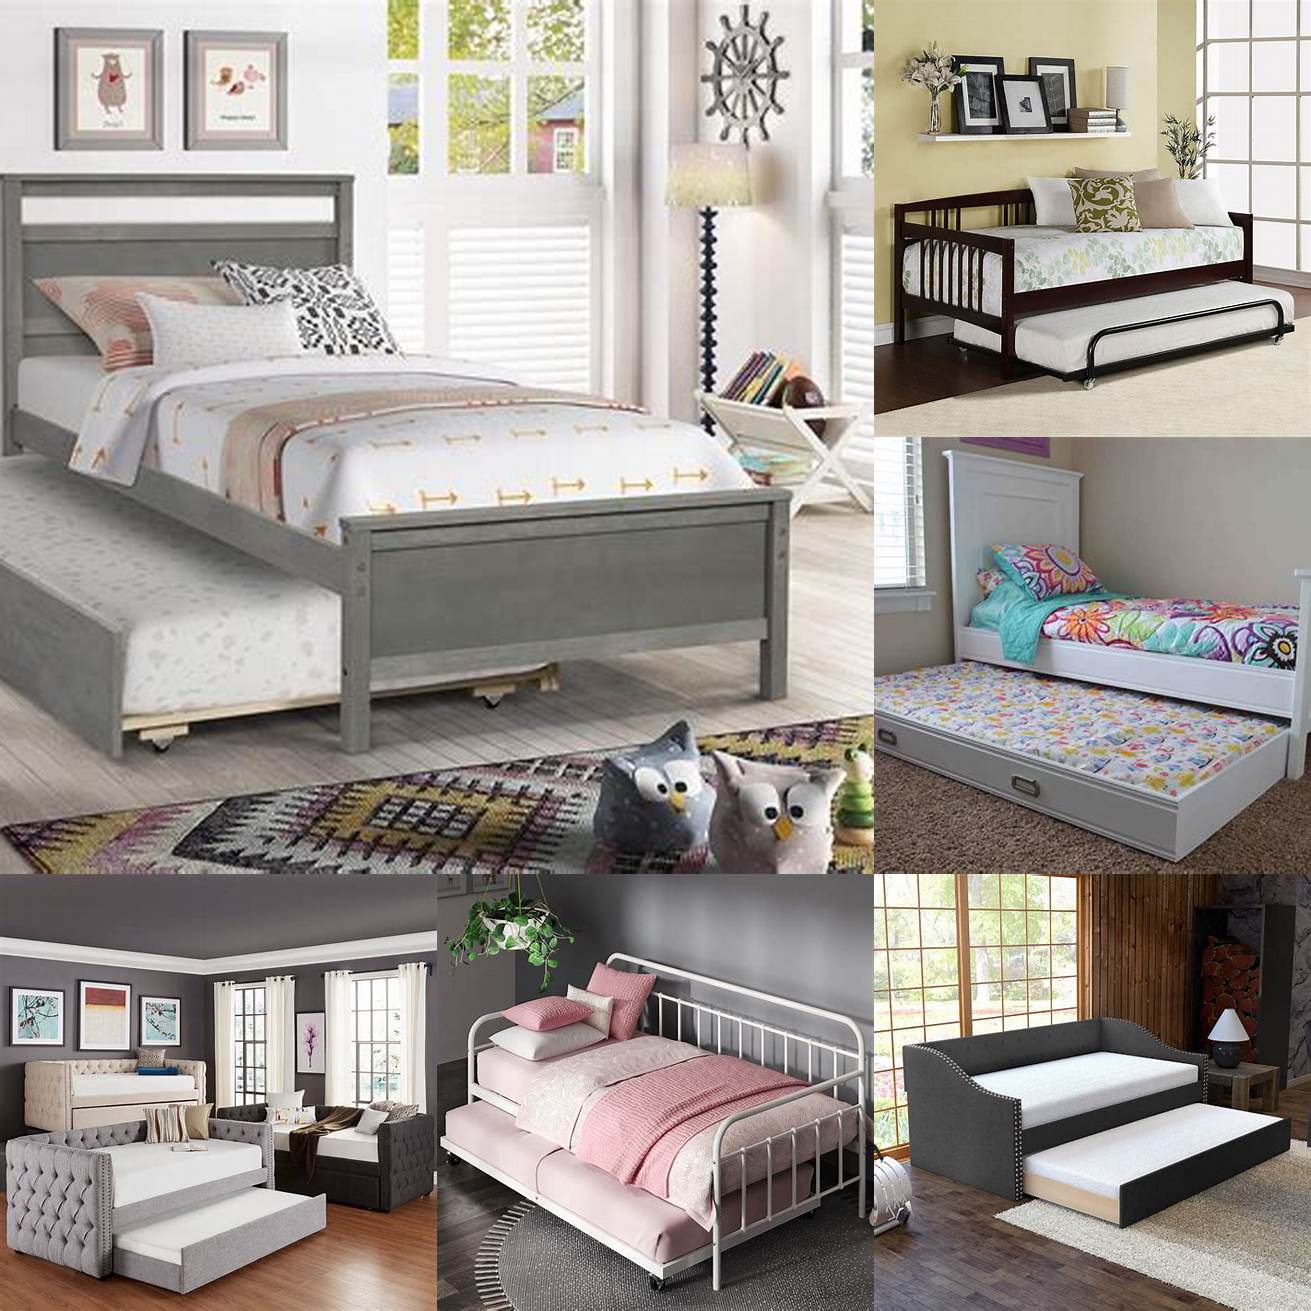 Convenient for guests Twin beds with trundle are perfect for households that often have guests staying over The trundle bed can be easily pulled out and turned into a comfortable sleeping area for your guests